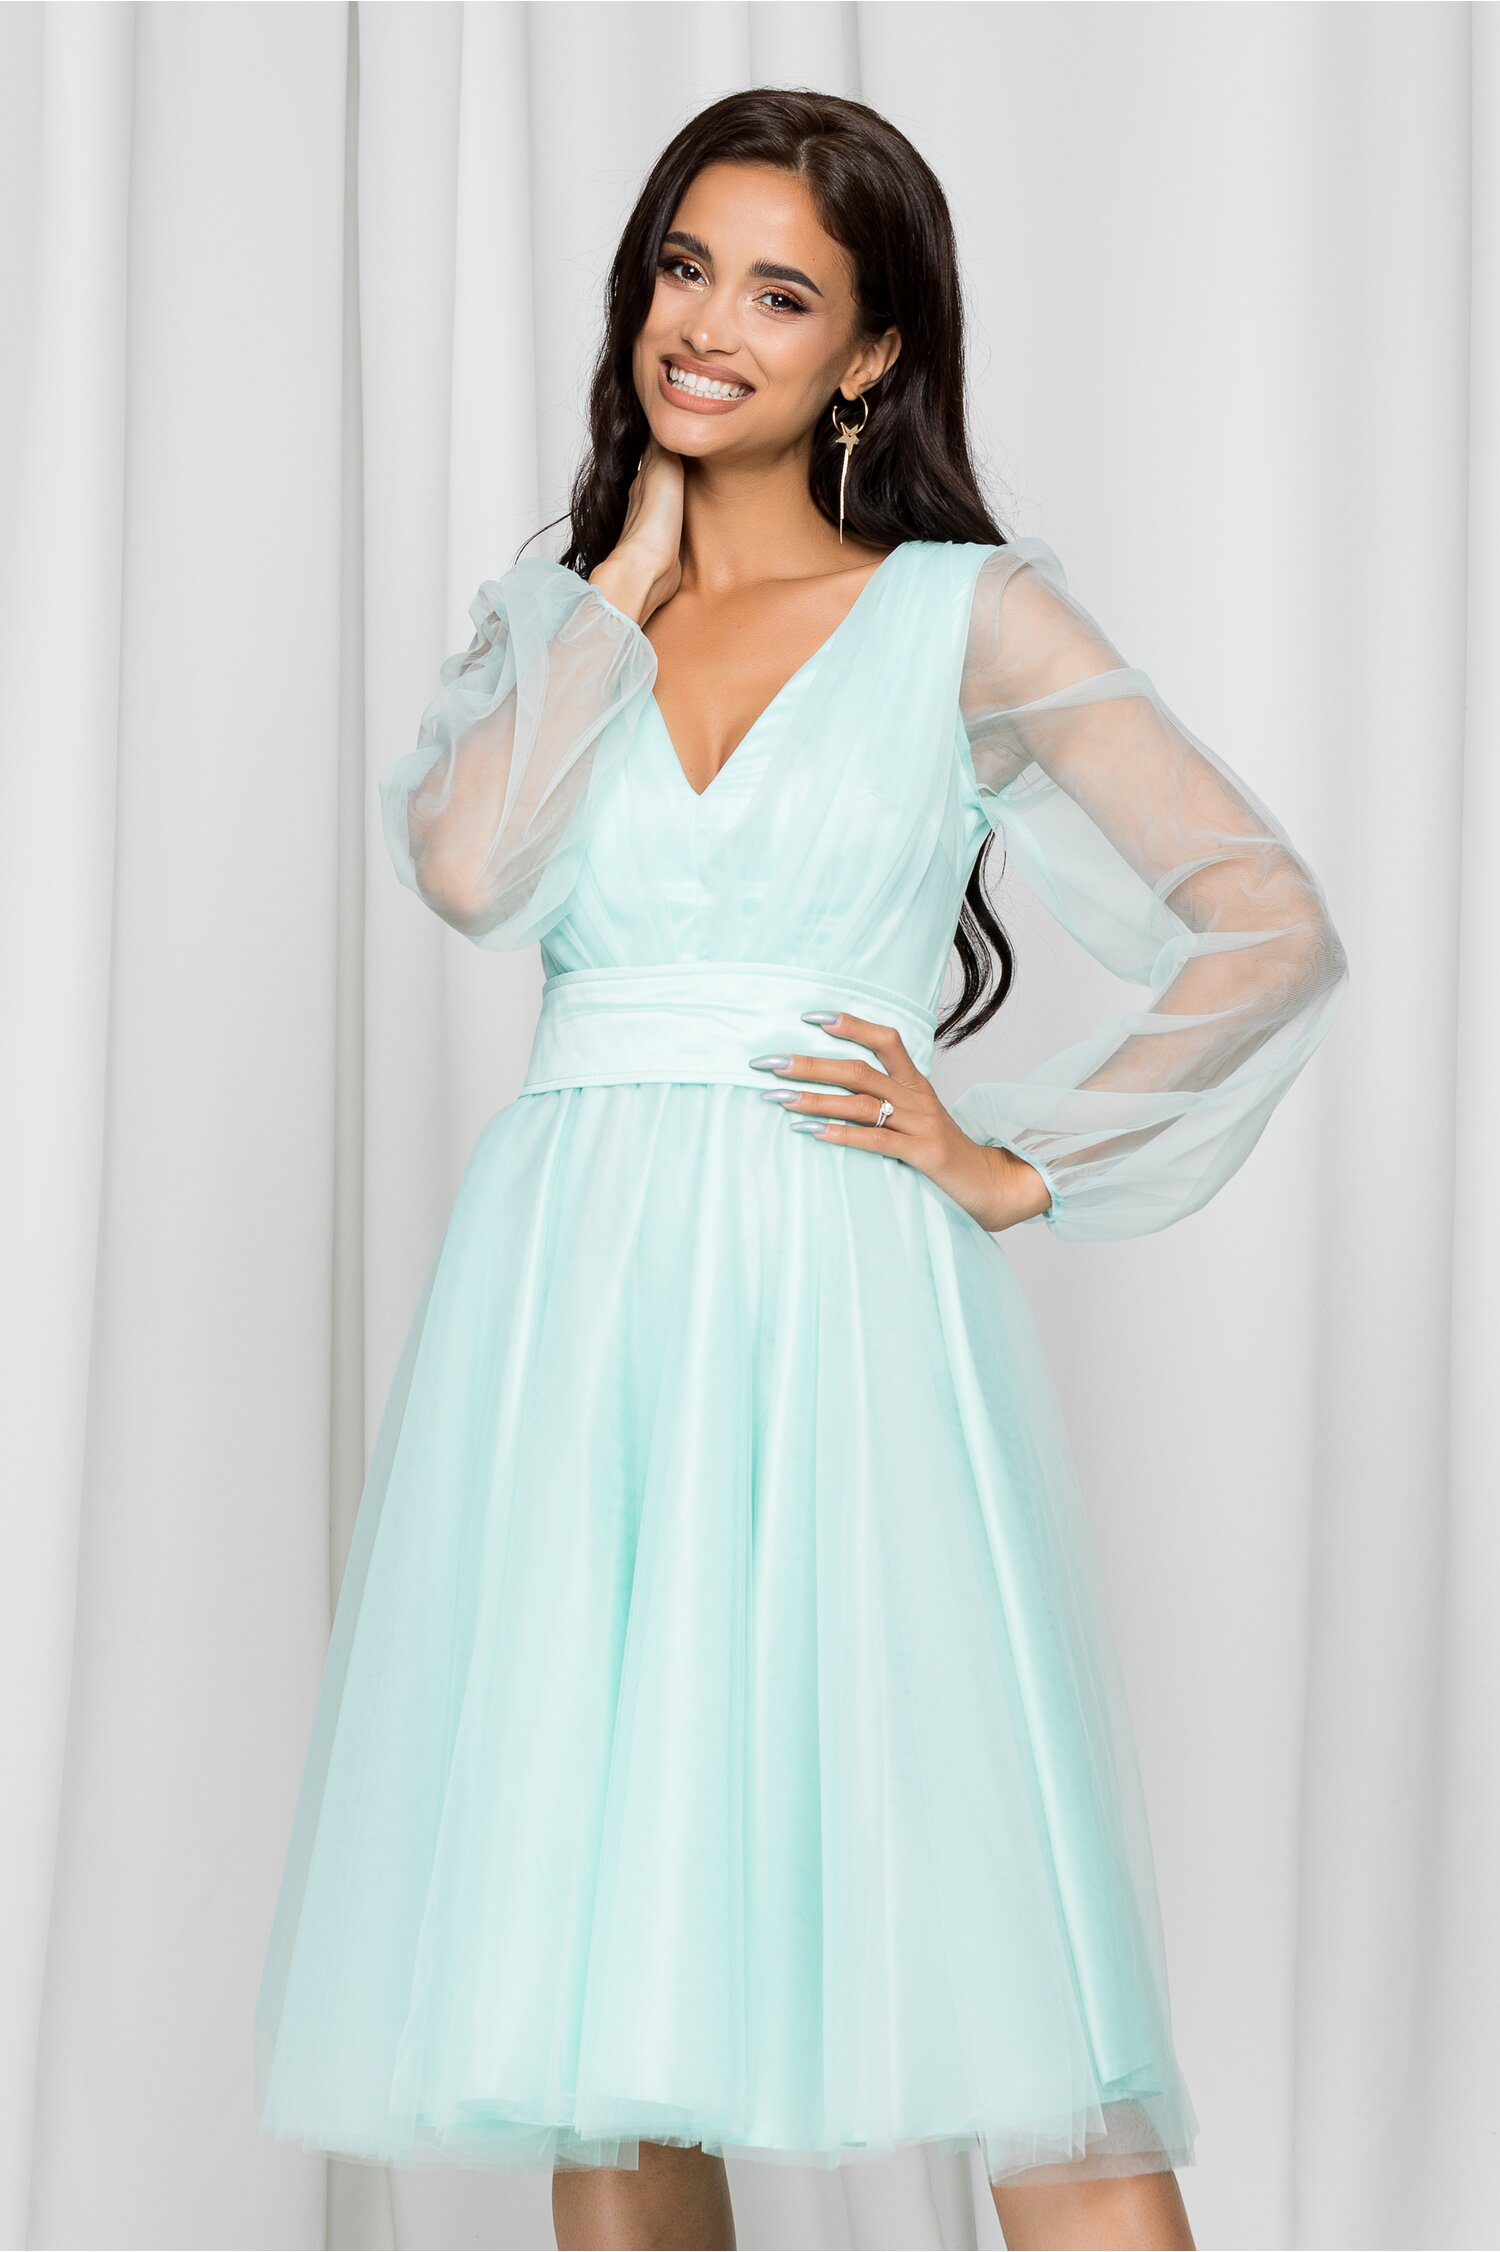 Rochie Ella Collection Madi verde mint din tulle dyfashion.ro imagine 2022 13clothing.ro